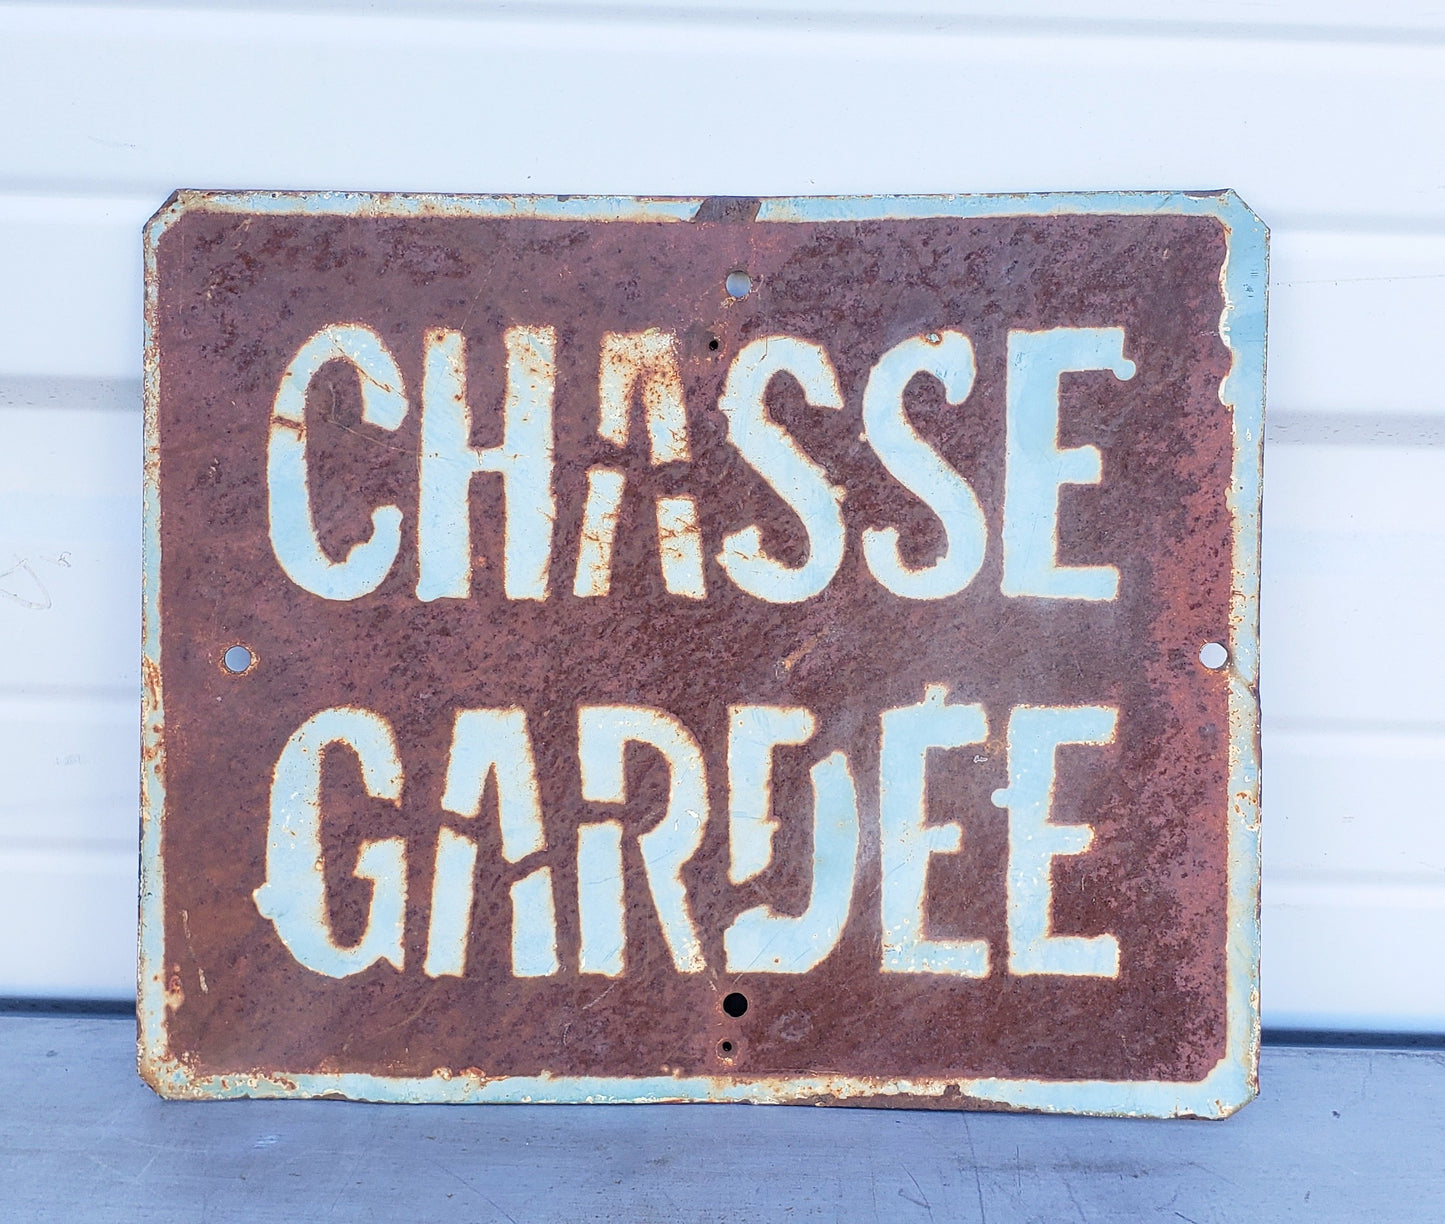 French Chasse Gardee (Private Hunting Ground) Metal Sign